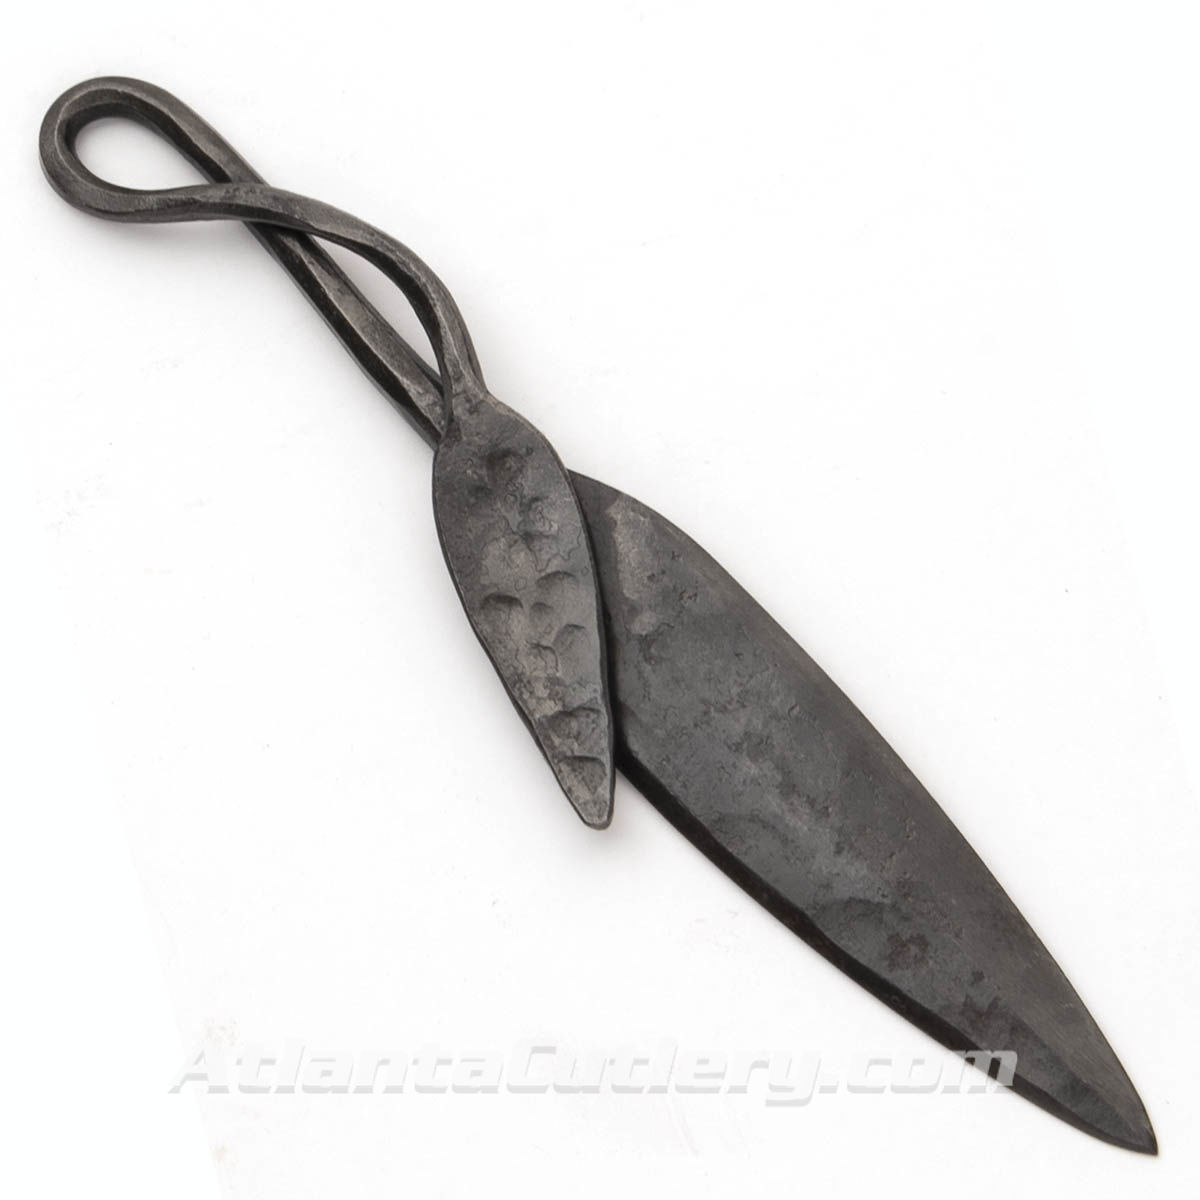 One continuous piece of steel is twisted and hammered to form a rustic double leaf design of this leaf knife